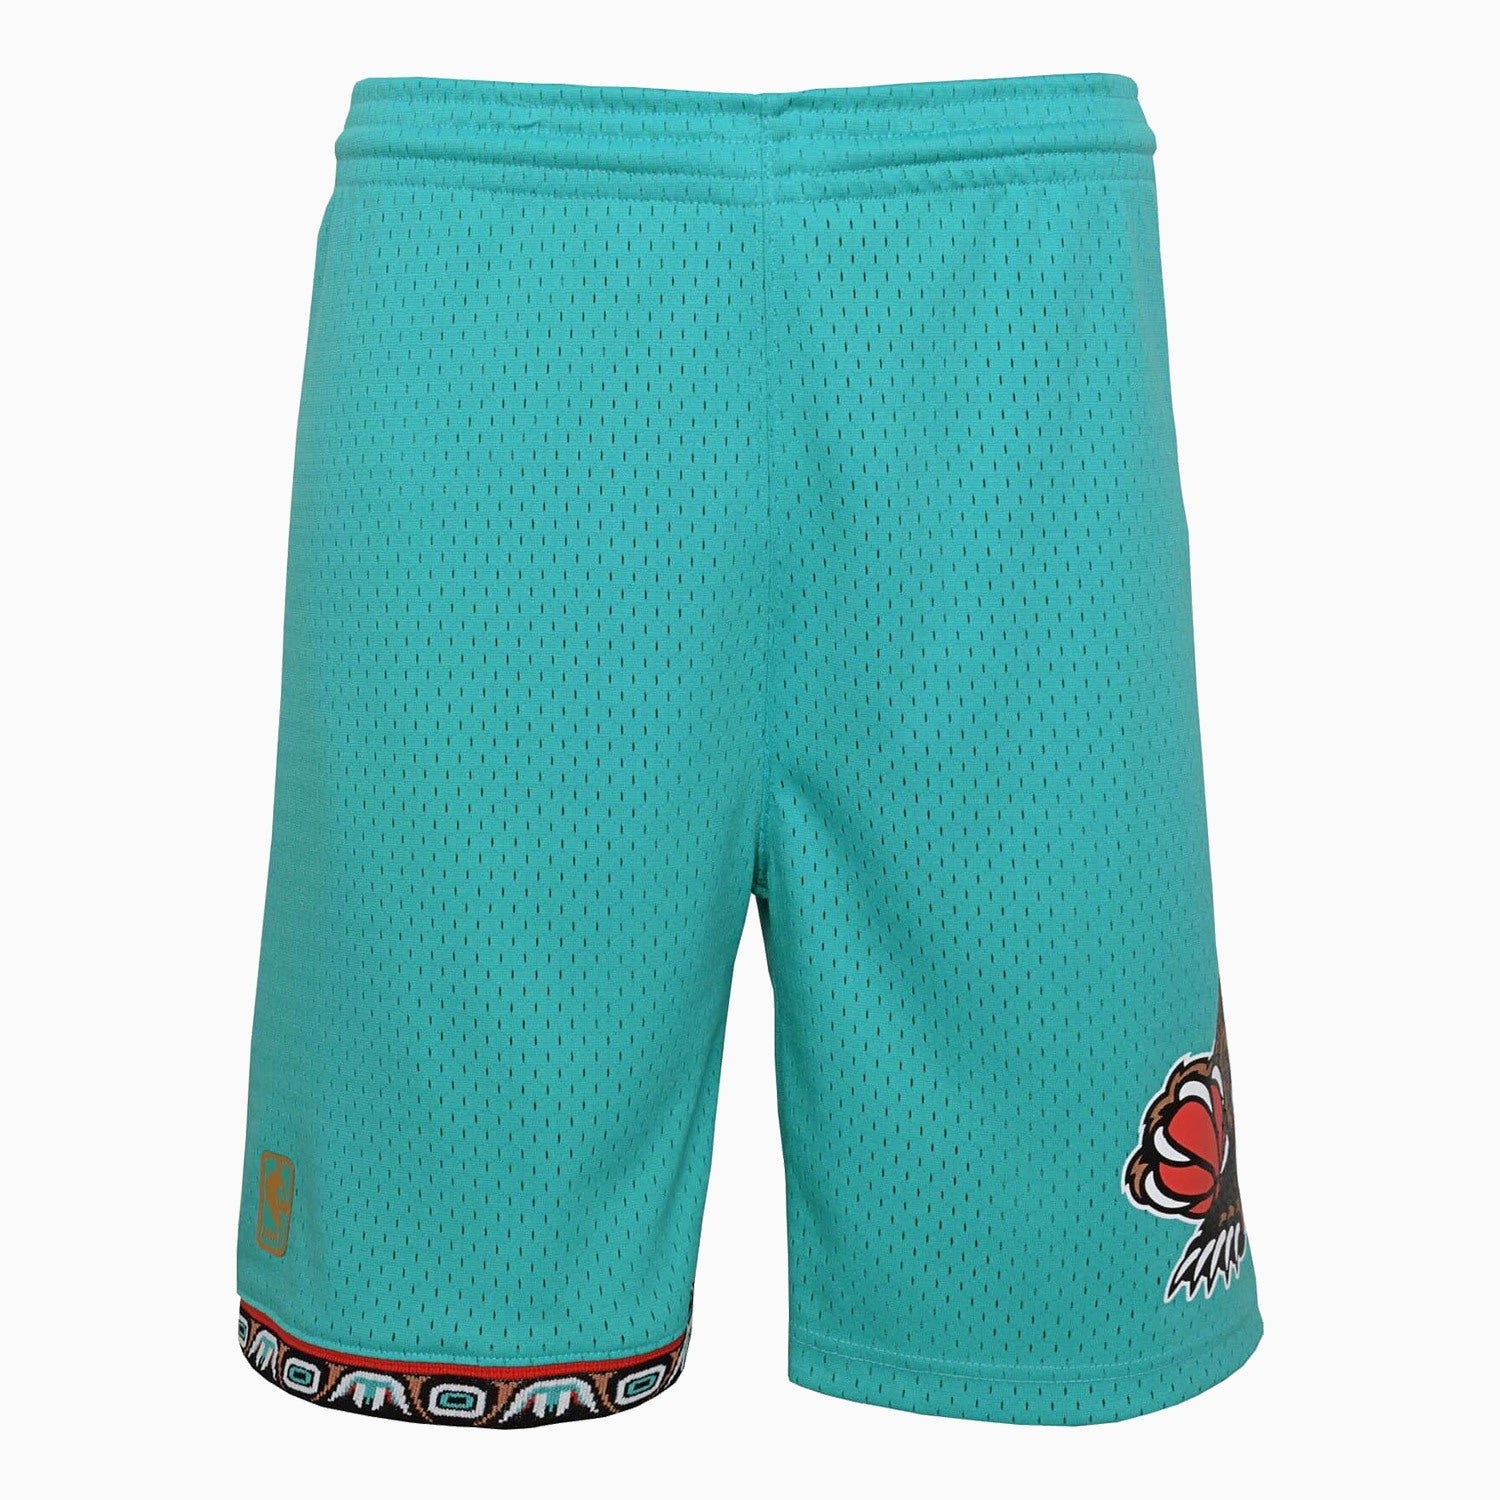 mitchell-and-ness-swingman-vancouver-grizzlies-nba-1996-97-shorts-youth-9n2b7bsd0-vgz